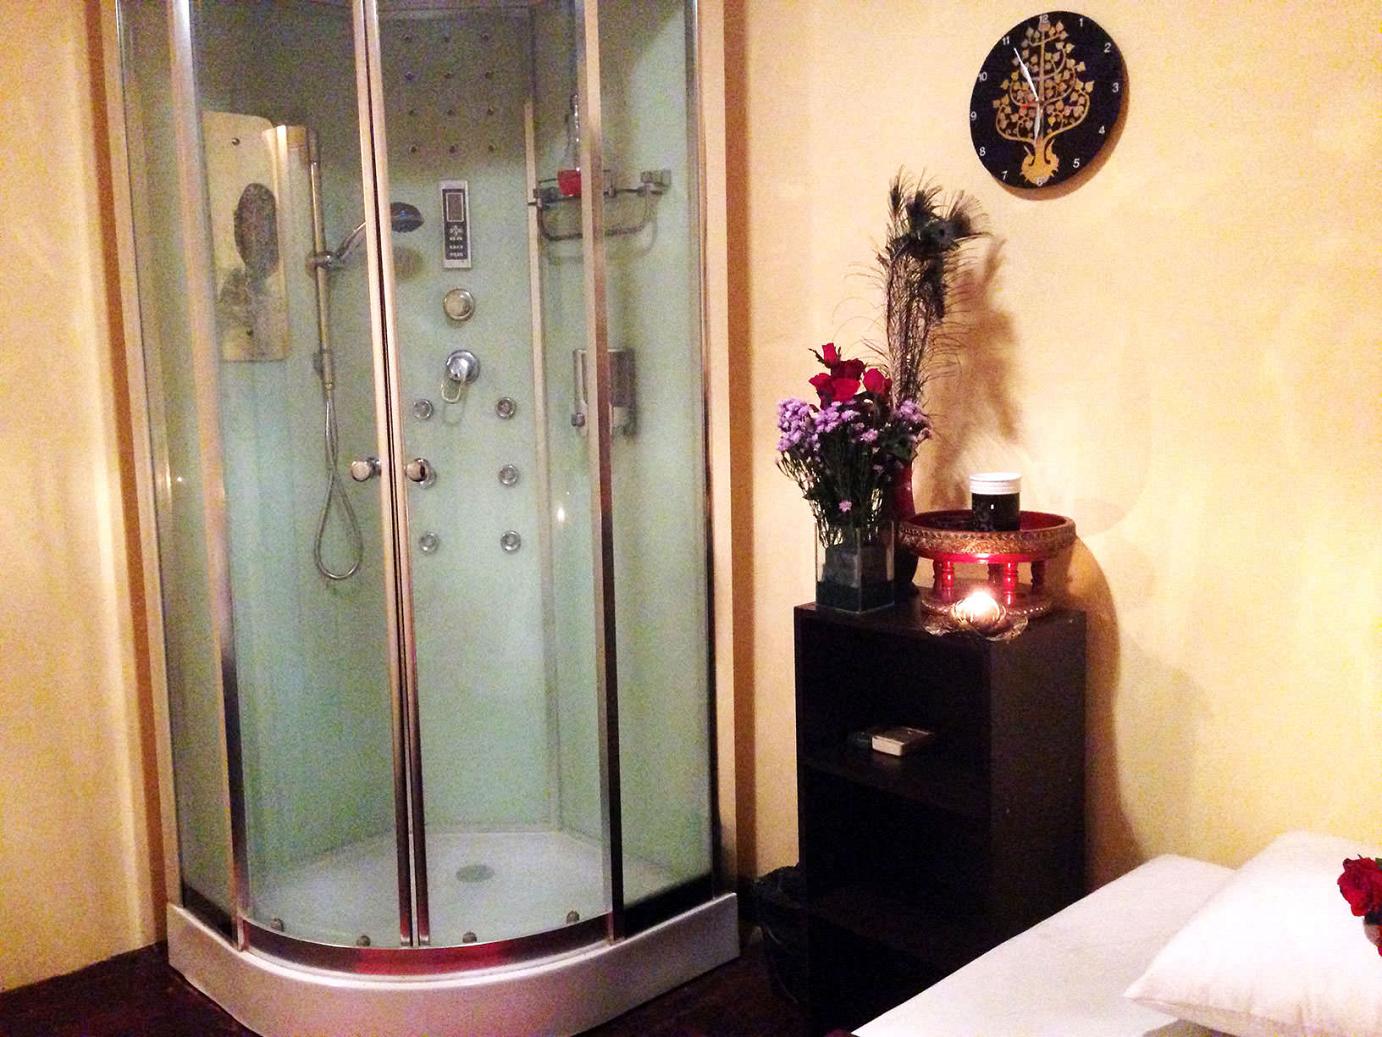 Showers in every room at HoneyBee Massage